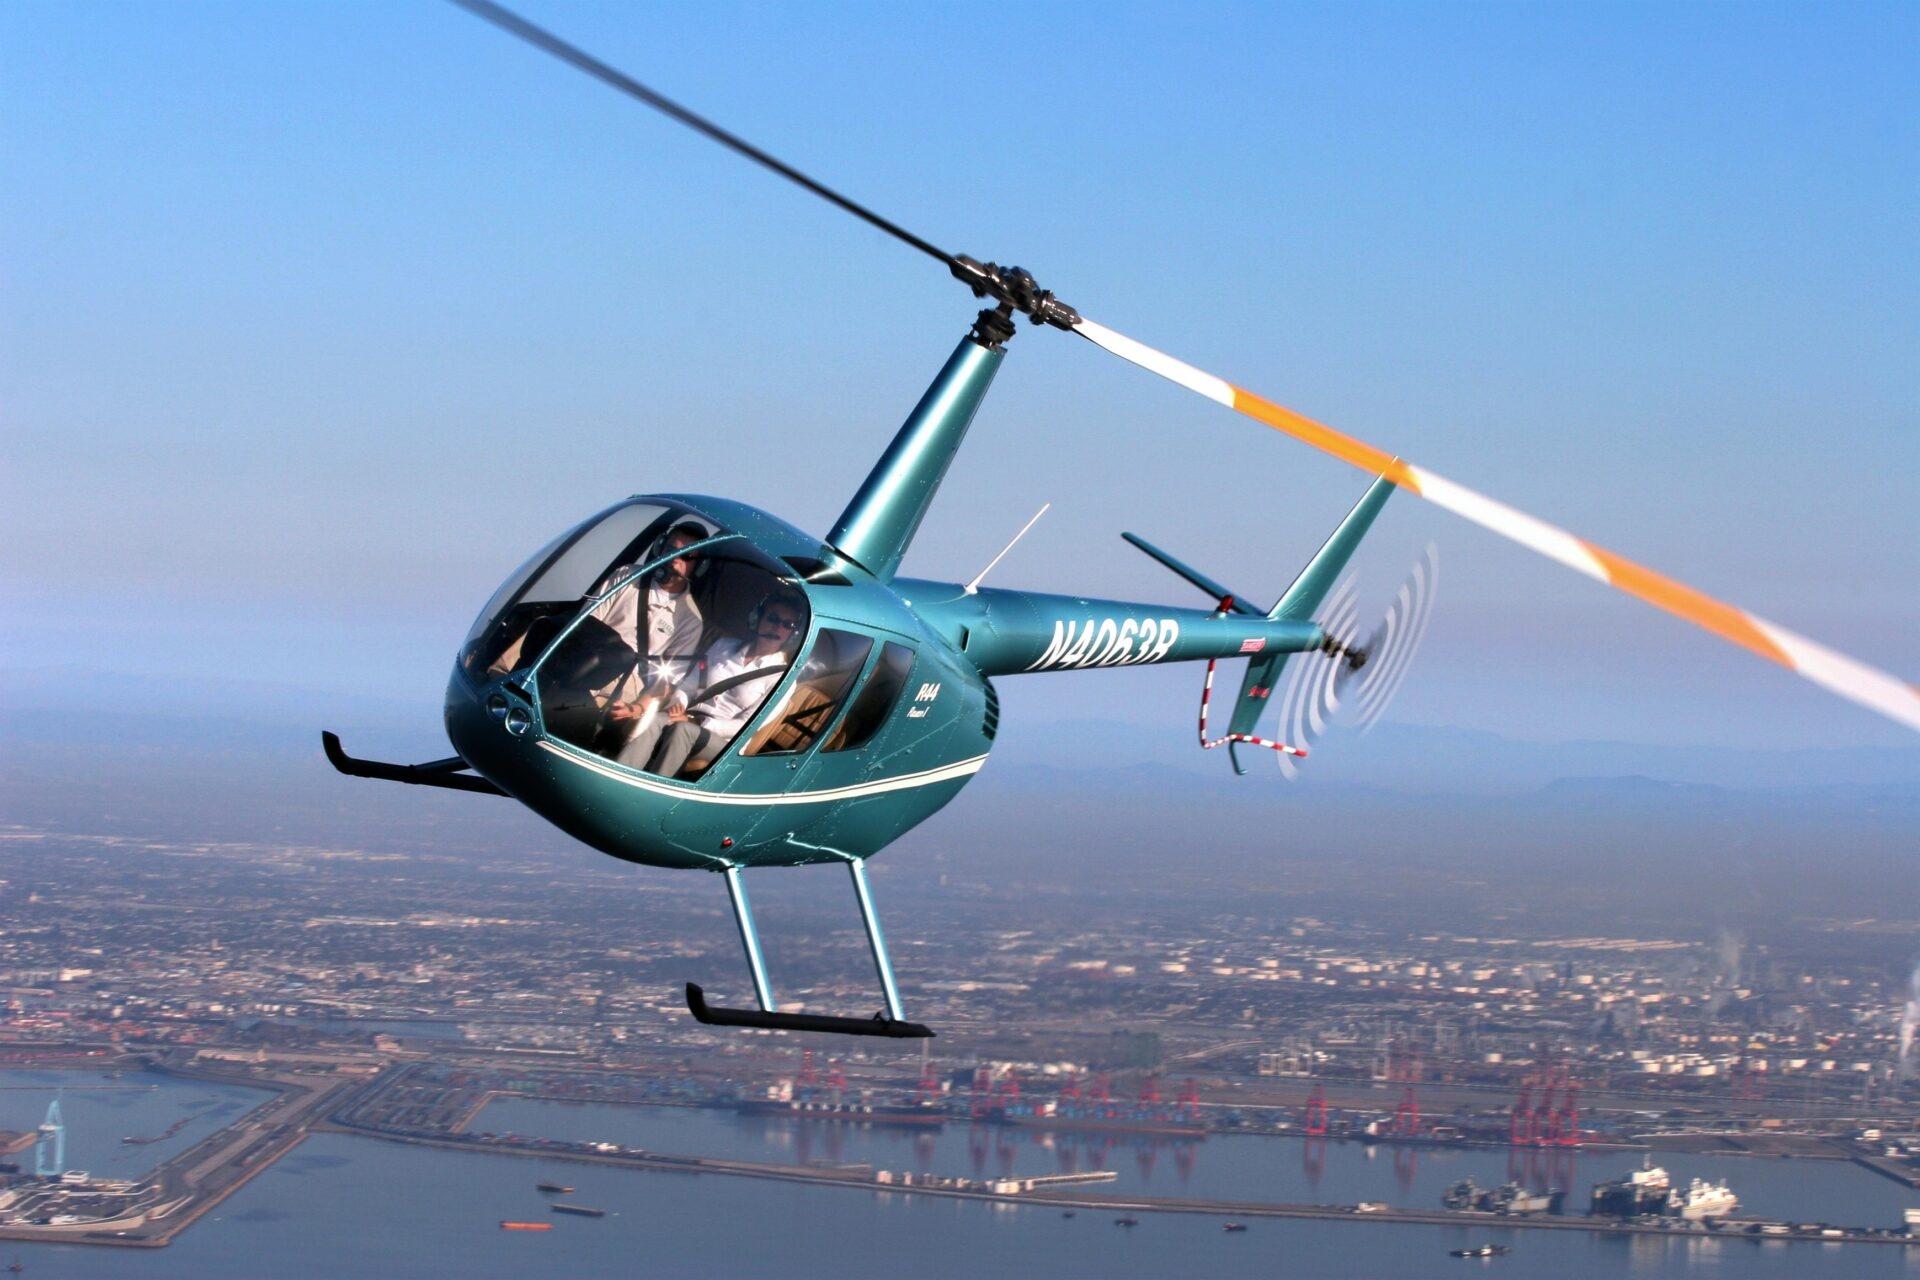 Robinson Helicopters, Turbine Adventure, R66, Flying Pig Helicopters, 1920x1280 HD Desktop